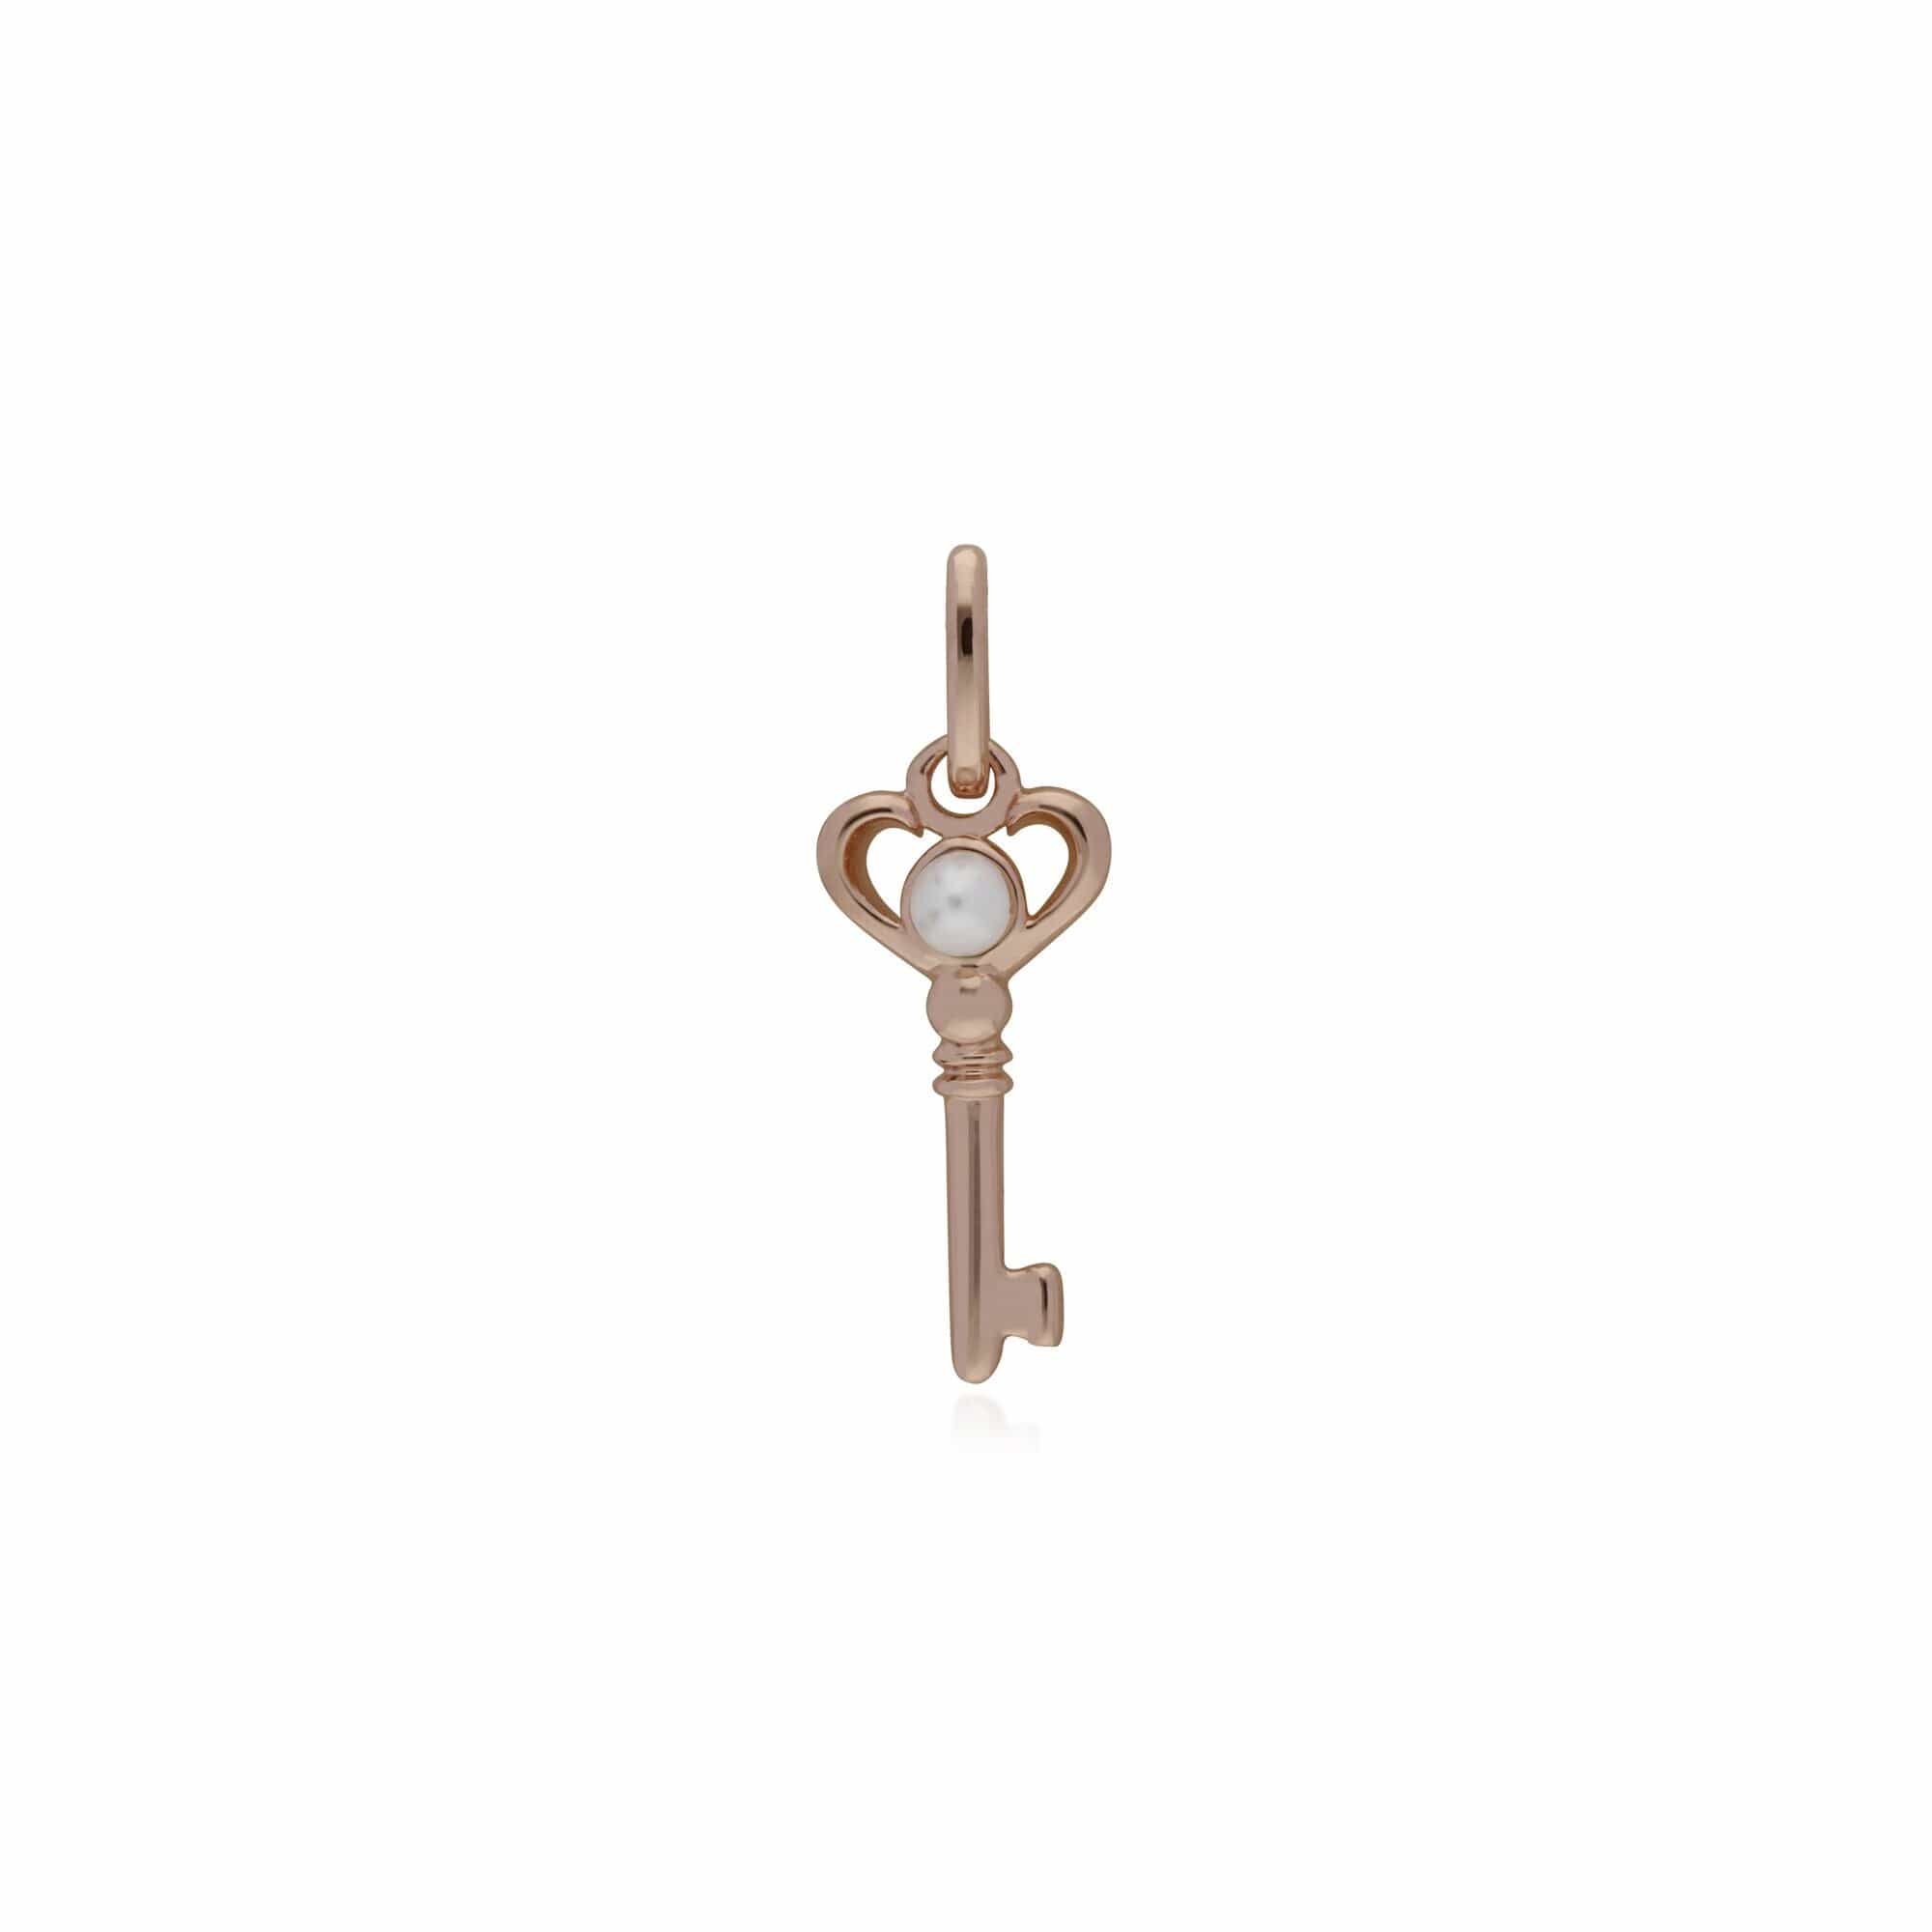 270P027101925-270P026501925 Classic Swirl Heart Lock Pendant & Pearl Key Charm in Rose Gold Plated 925 Sterling Silver 2